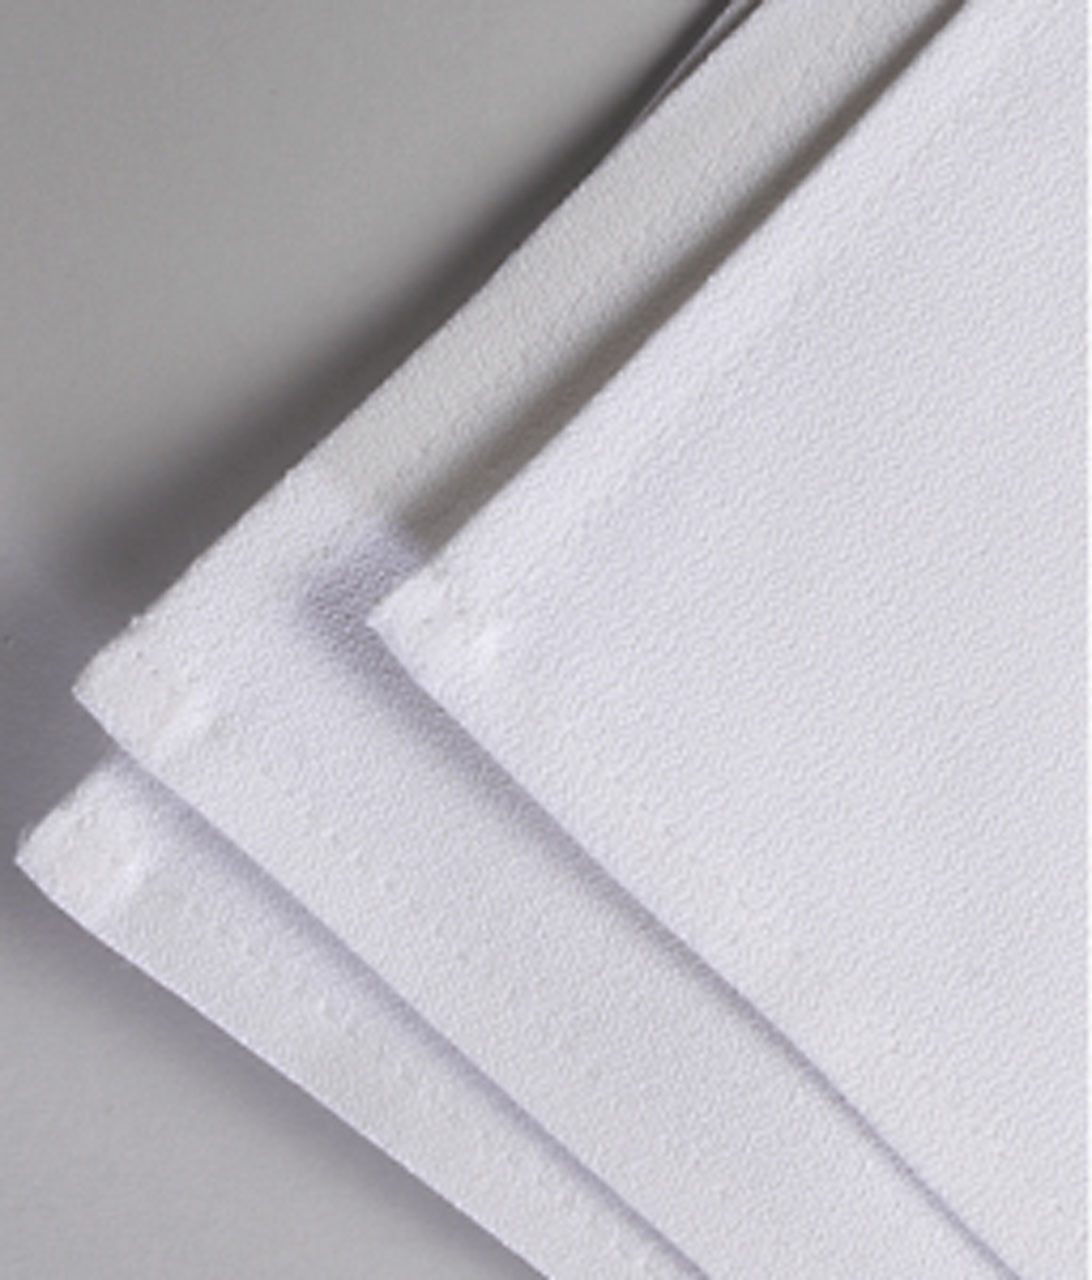 From which location are the Cotton Momie Square Table Linens shipped?